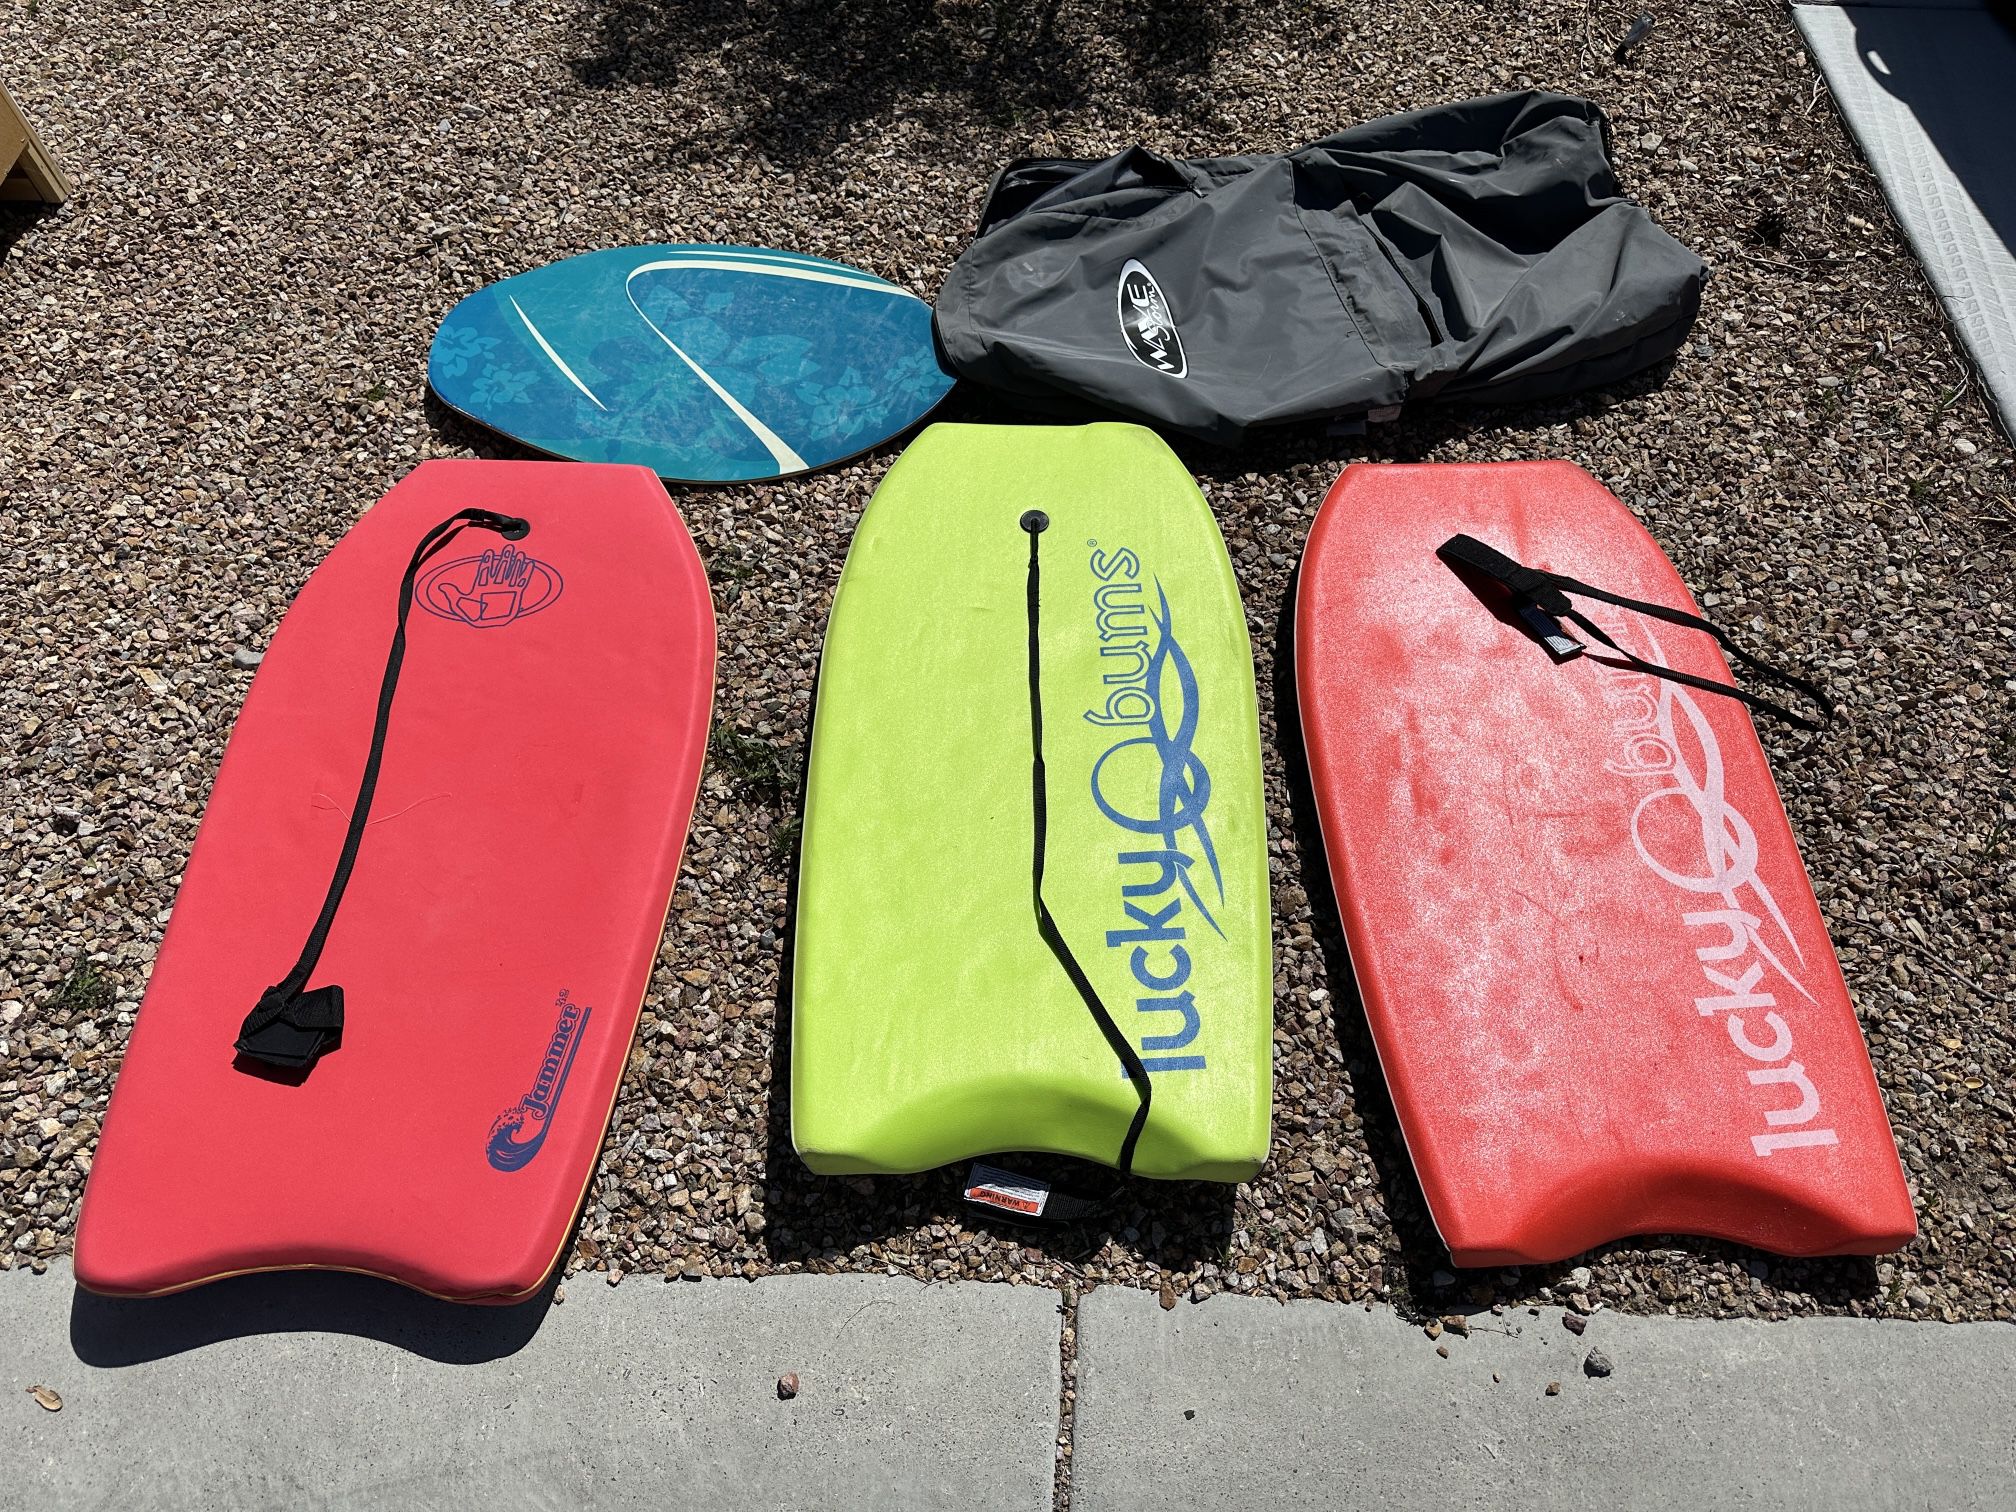 Boogie Board/skim Board With Travel Case $25 Each Or Everything For $80